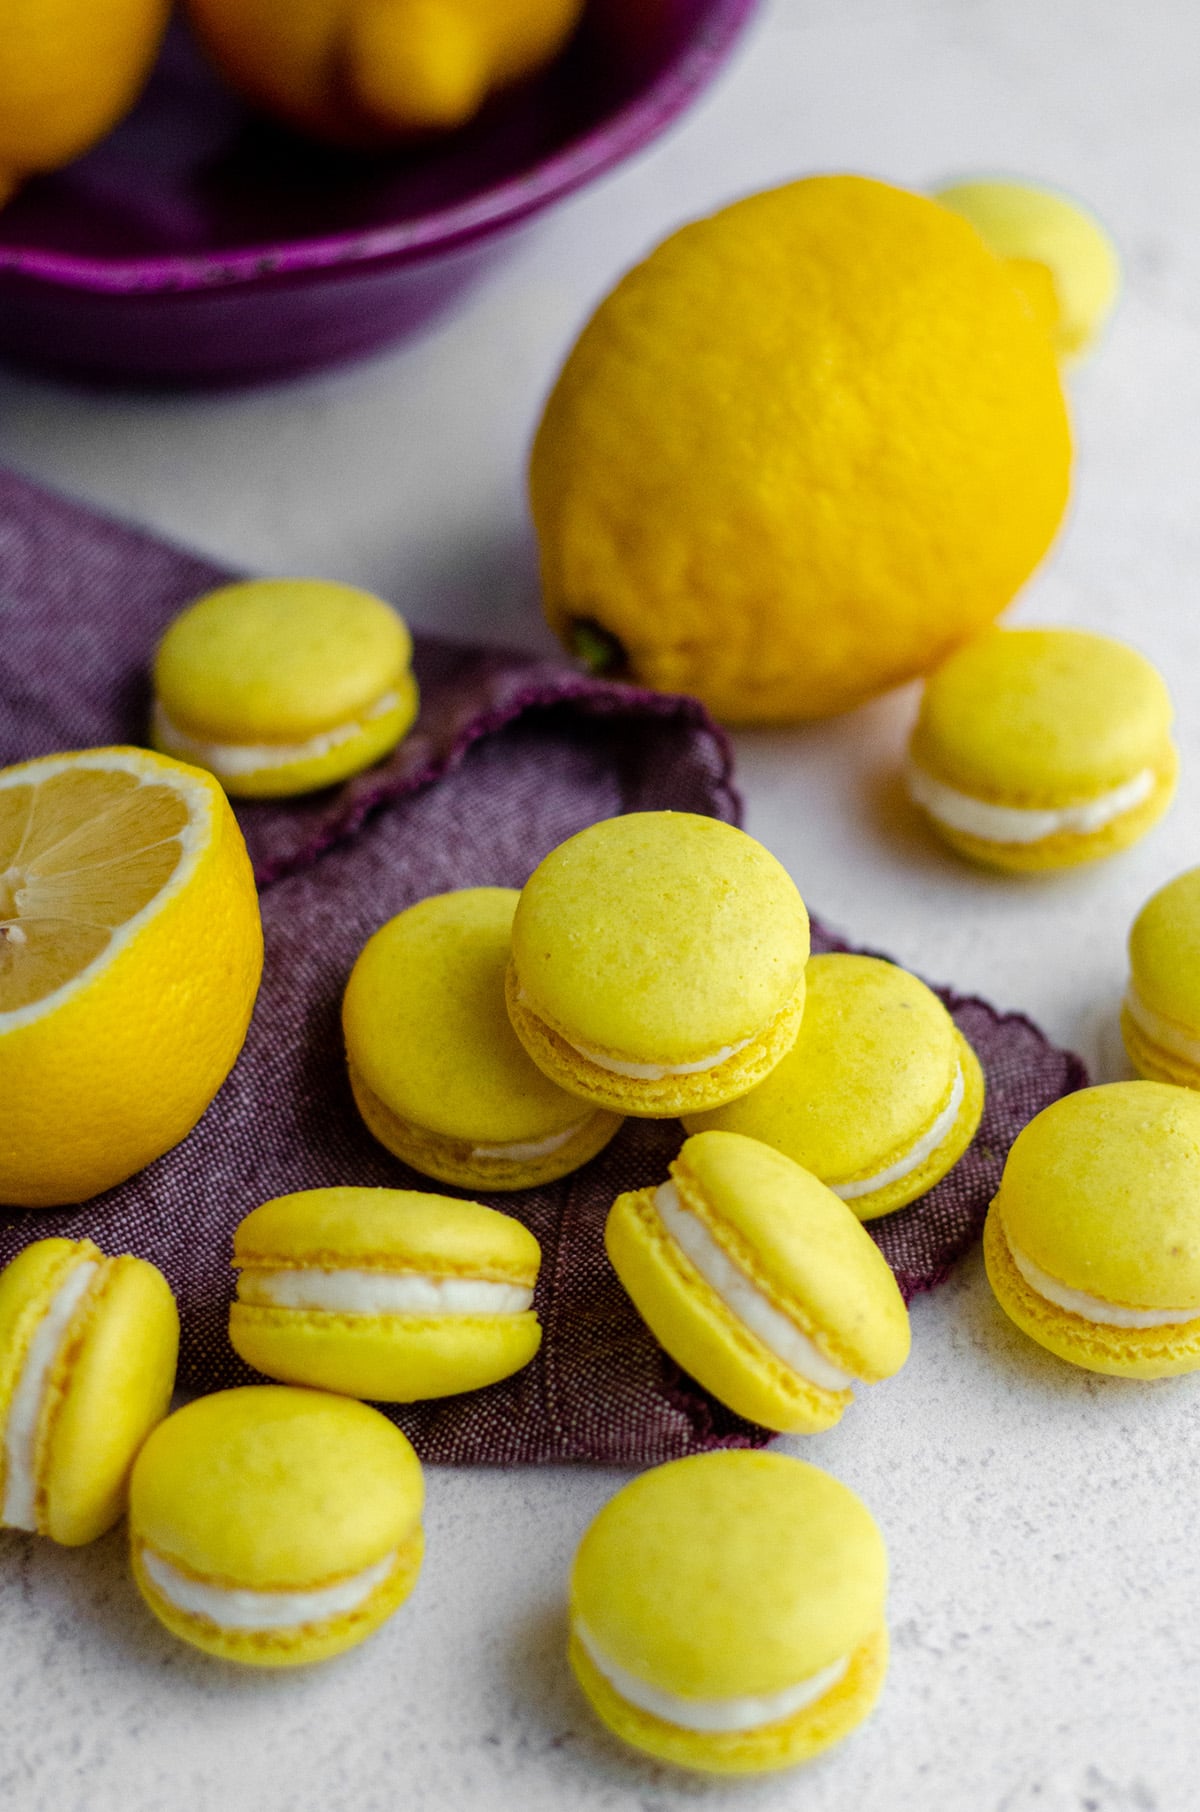 Lemon Macarons: These sweet and tart lemon macarons are filled with a tangy lemon buttercream. The lemon French macarons feature actual lemon zest as well as lemon extract to bring all the flavor without sacrificing that light and airy macaron texture.